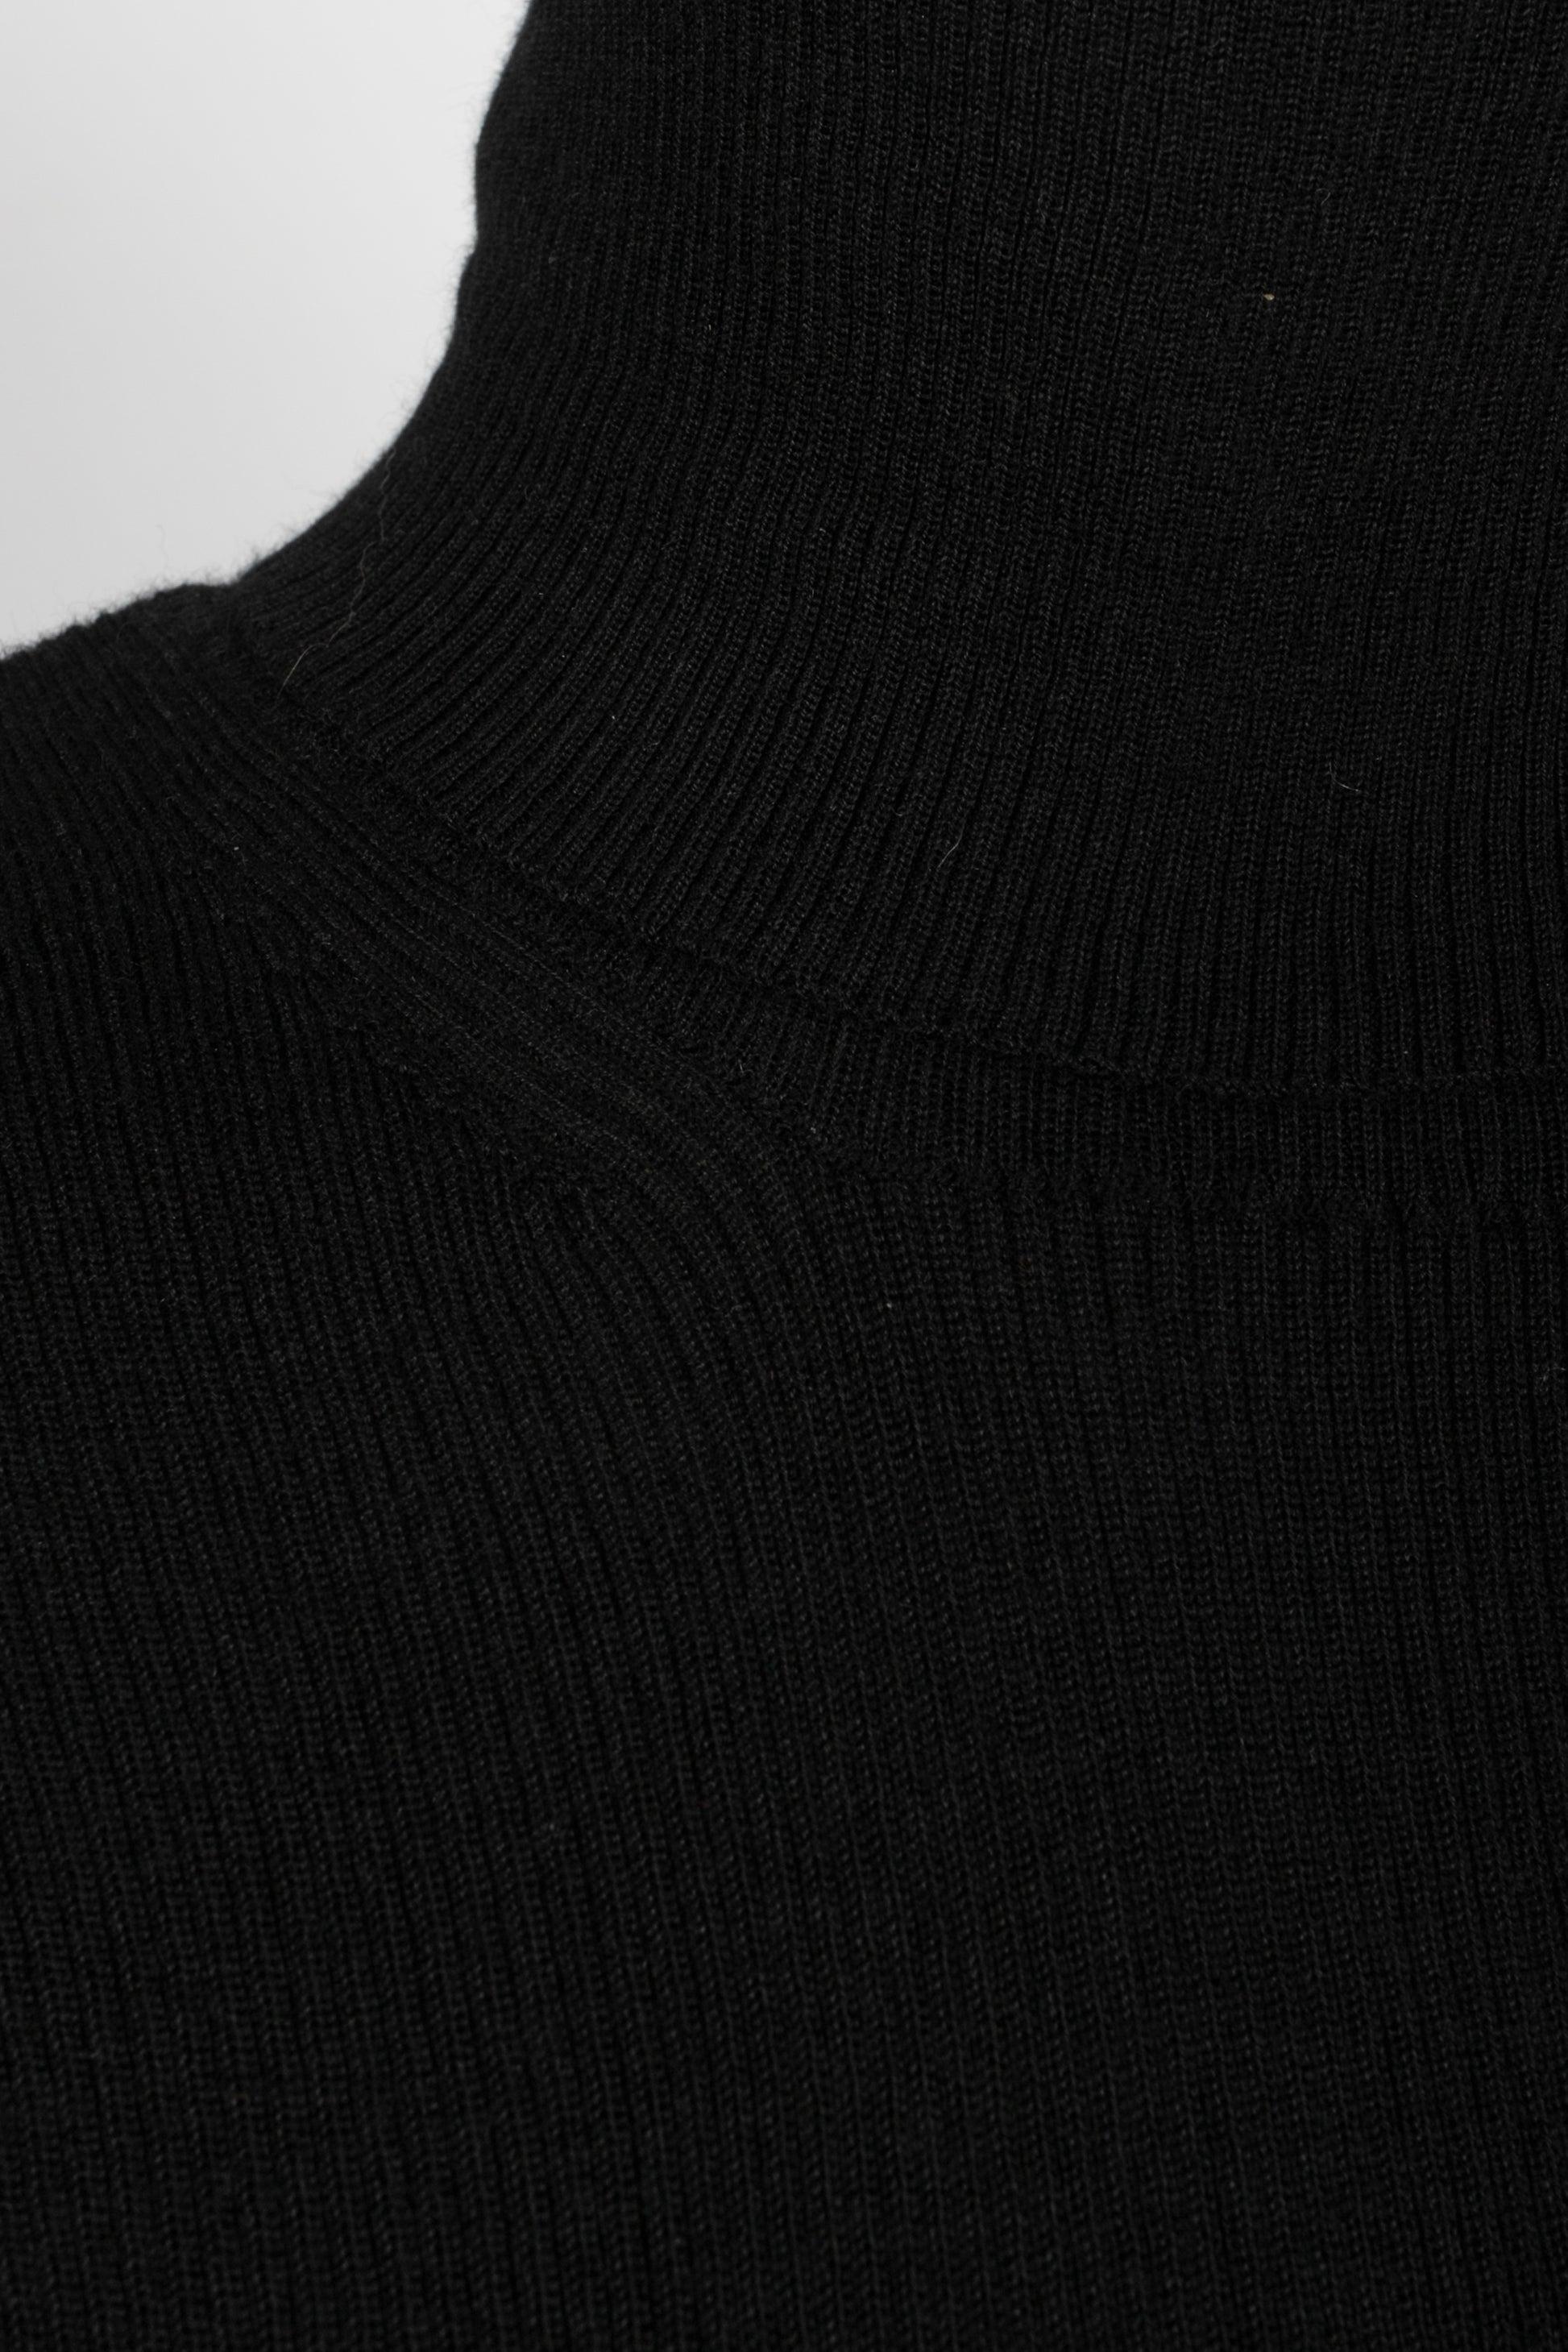 Chanel Black Cashmere and Wool Turtleneck Sweater 1